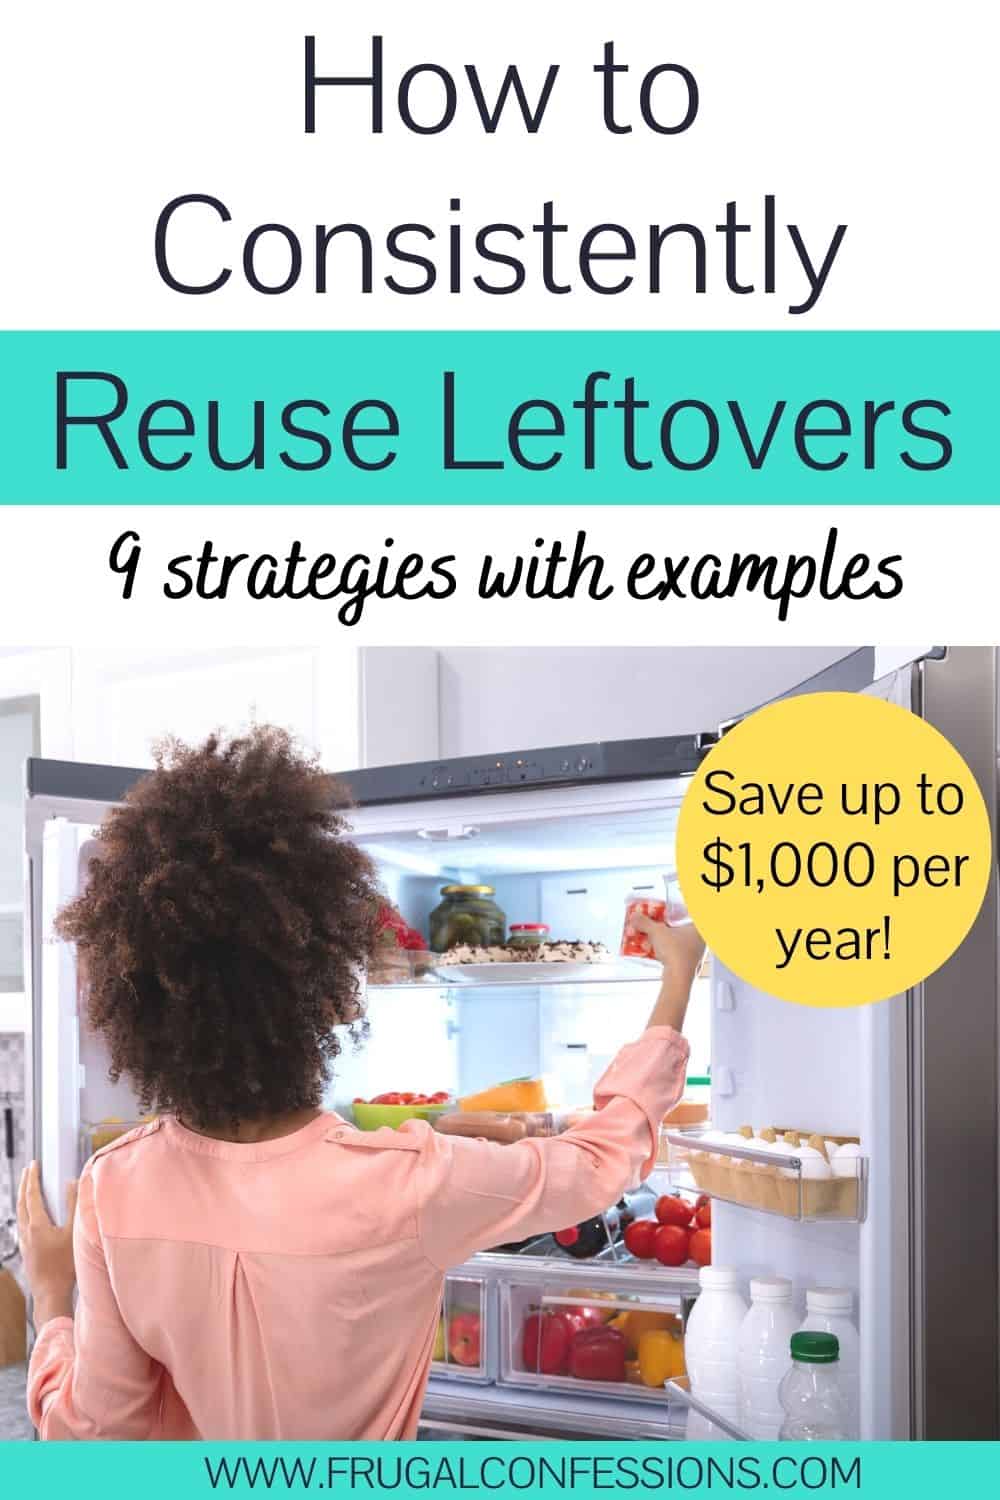 woman in peach-colored shirt reaching into fridge, text overlay "how to reuse leftover food consistently"